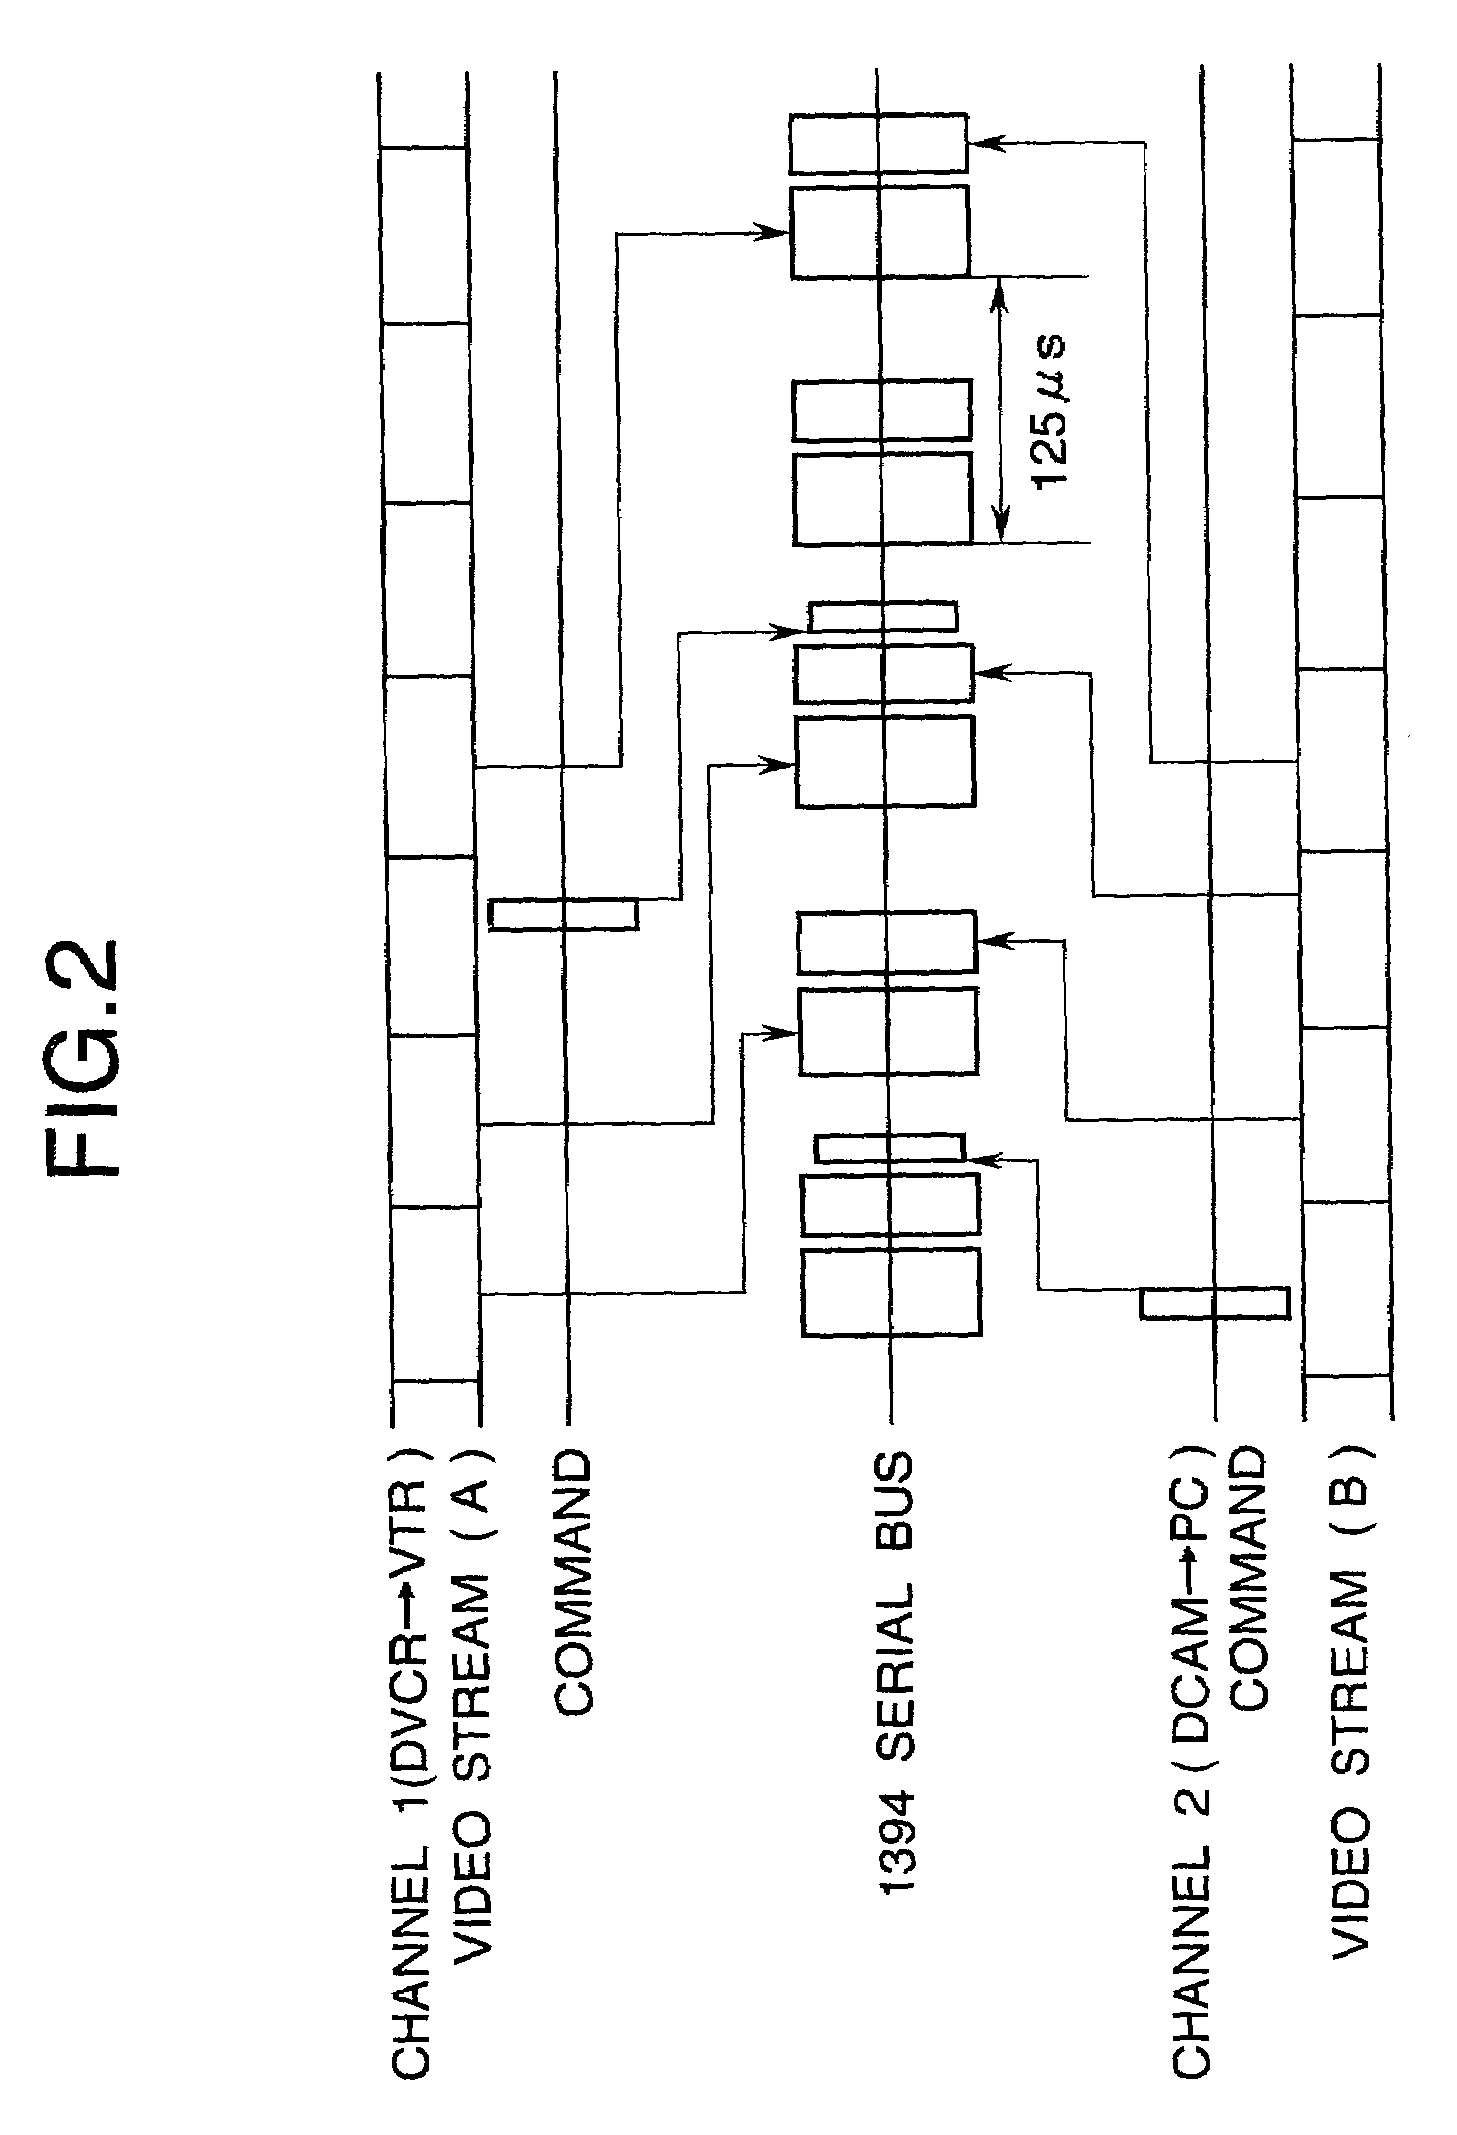 Communication apparatus and a method of controlling a communication apparatus